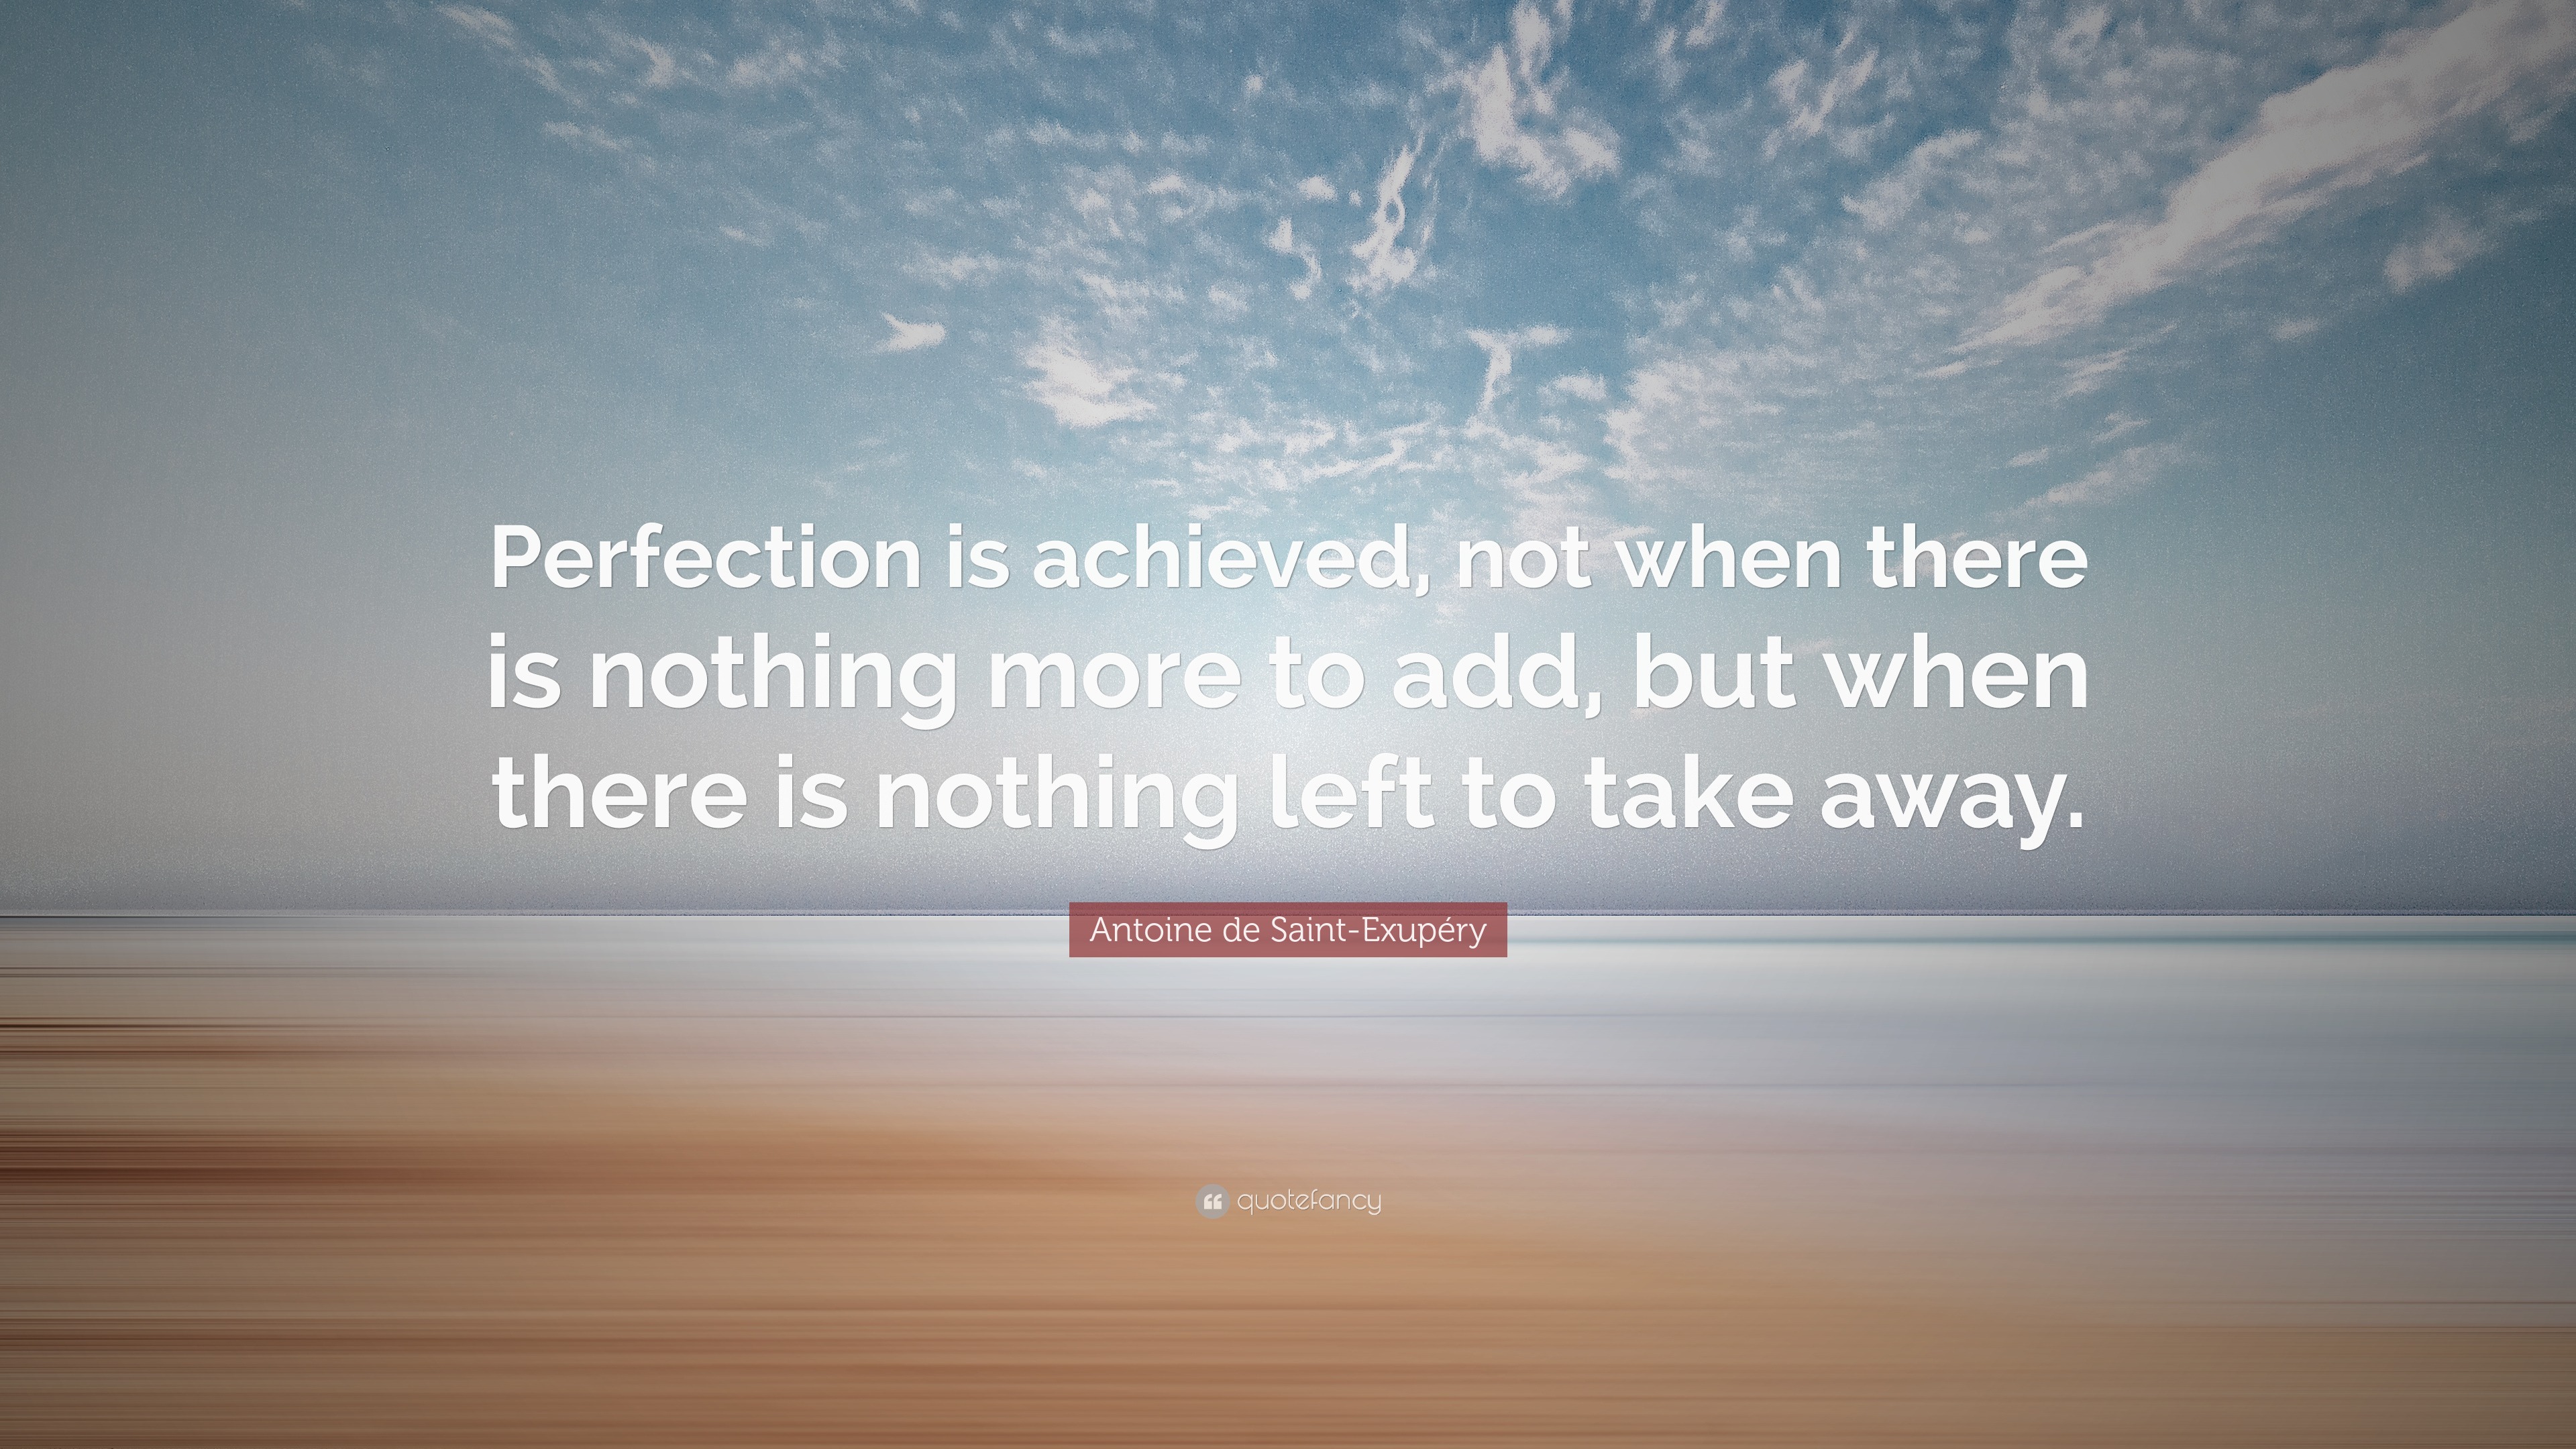 Antoine de Saint-Exupéry Quote: “Perfection is achieved, not when there ...